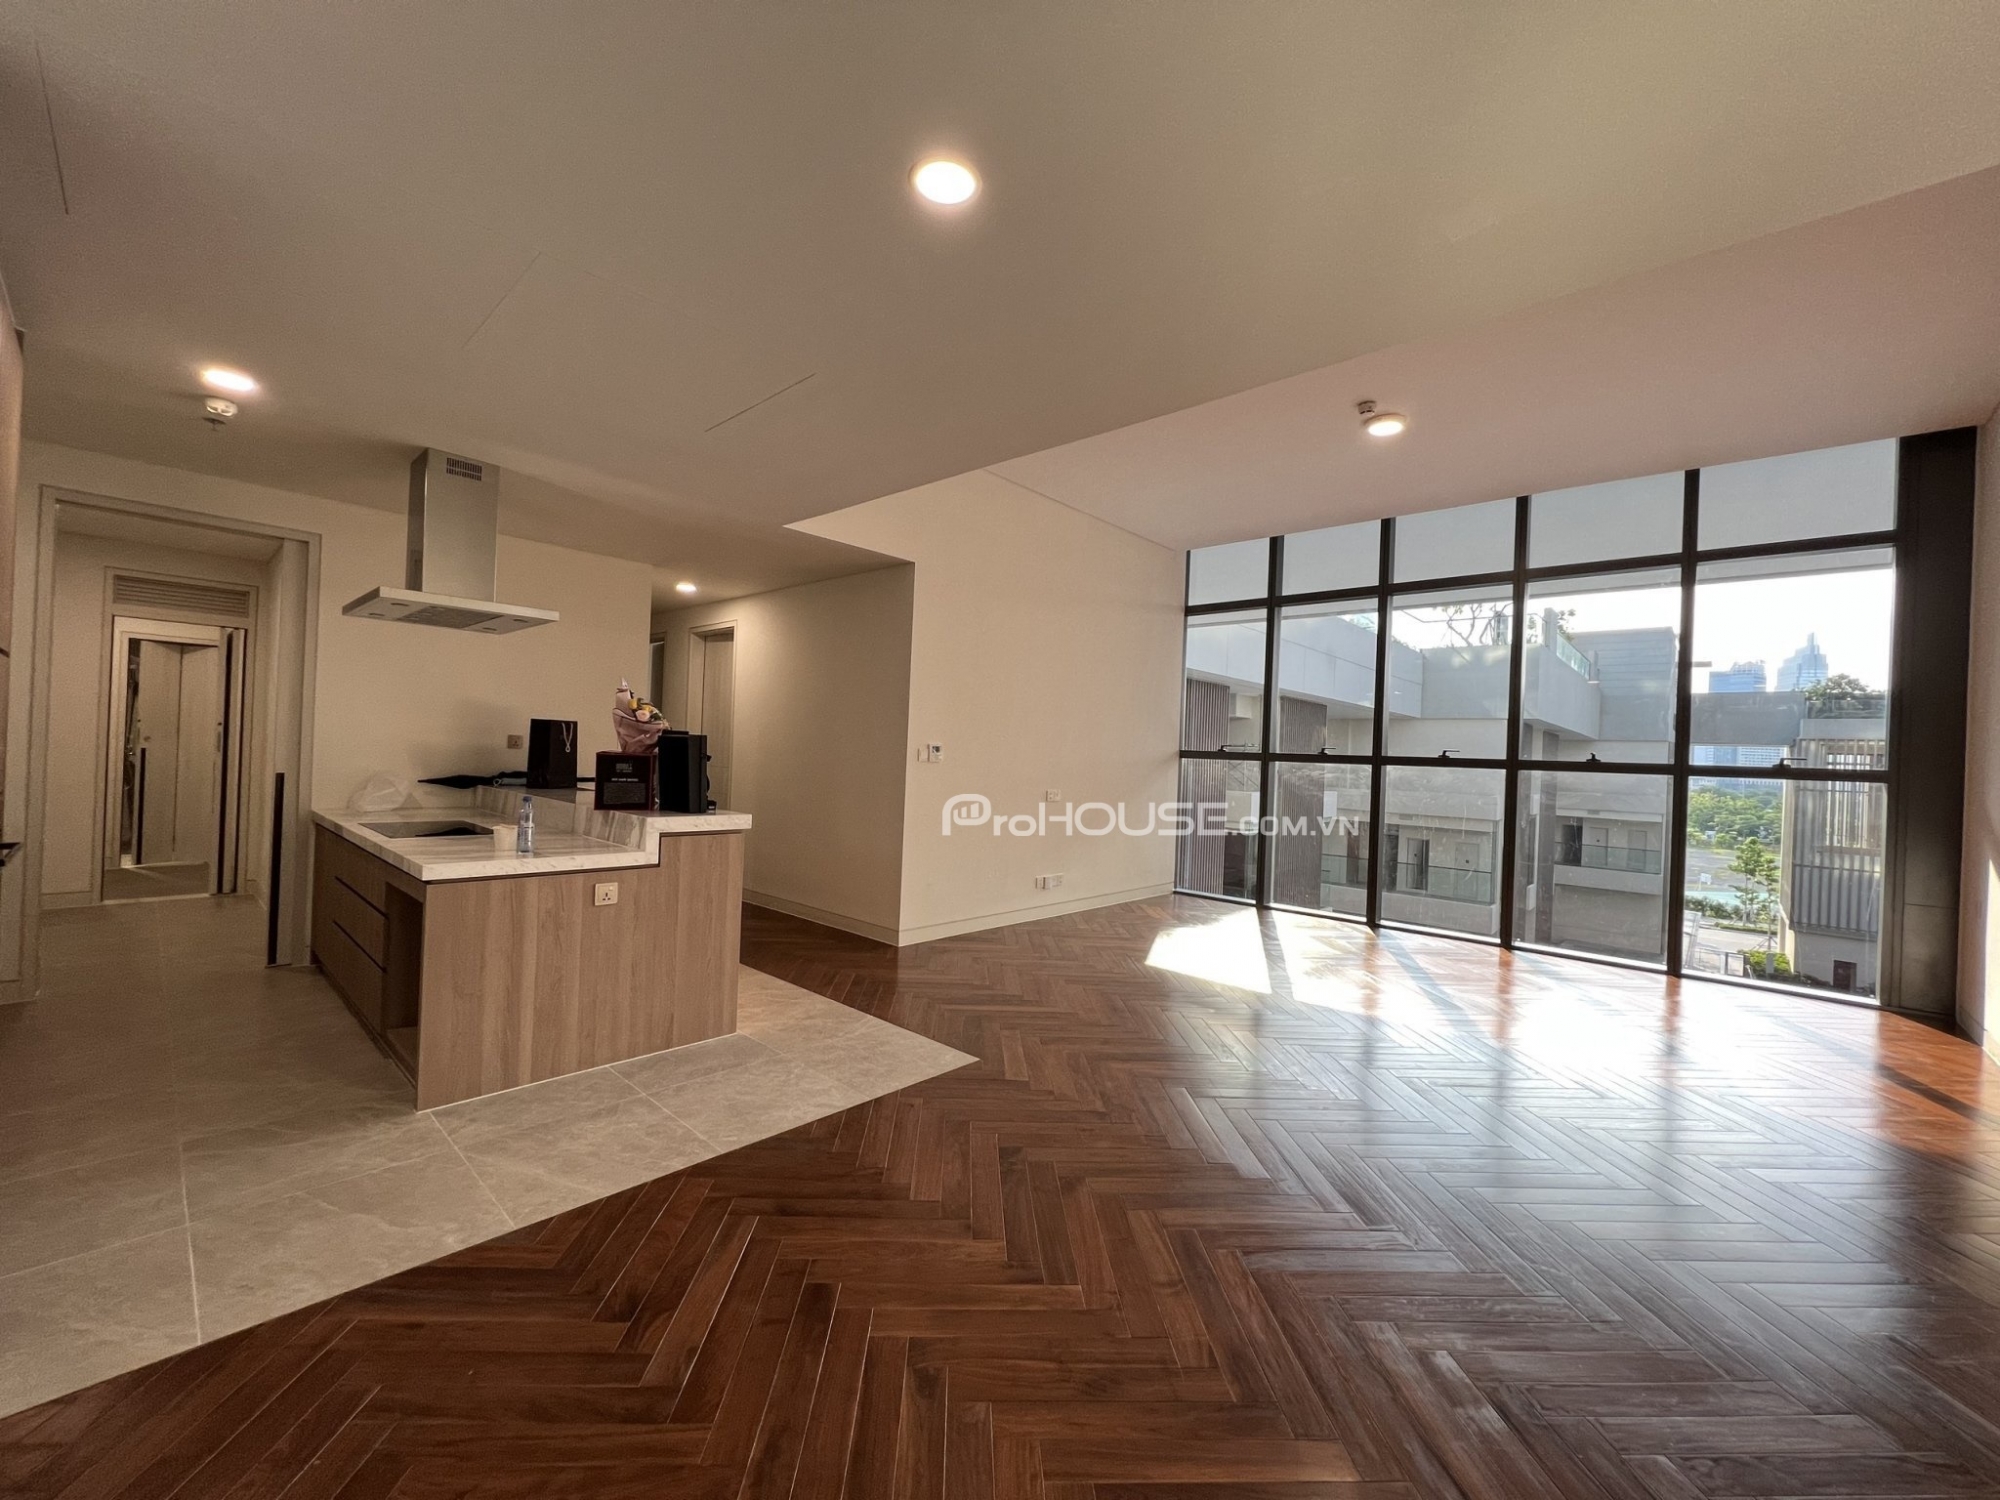 Low rental 2 bedrooms apartment for rent in Cove Residences